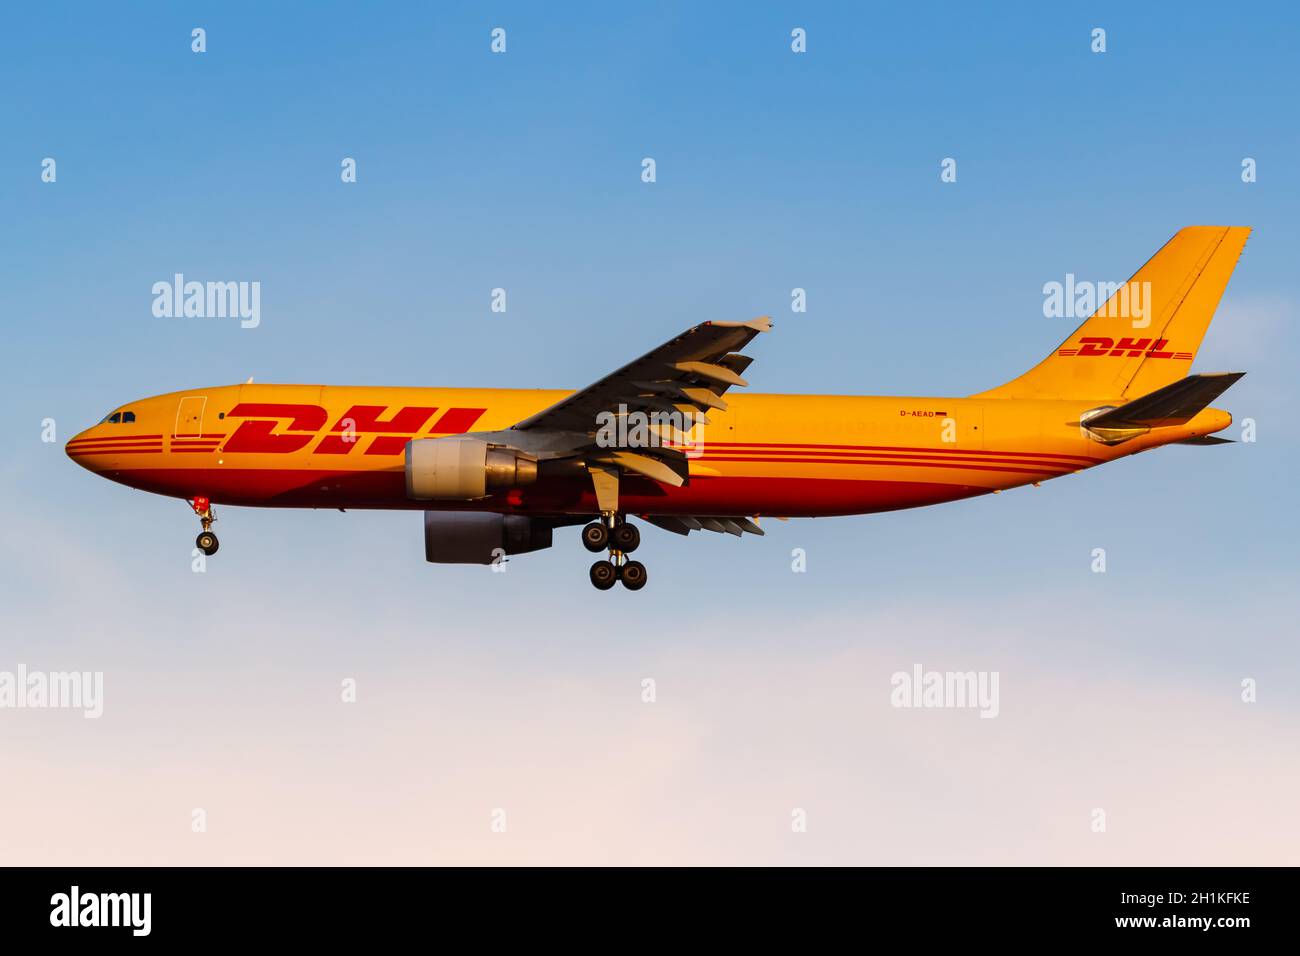 Athens, Greece - September 22, 2020: DHL European Air Transport Airbus A300-600F airplane at Athens Airport in Greece. Airbus is a European aircraft m Stock Photo